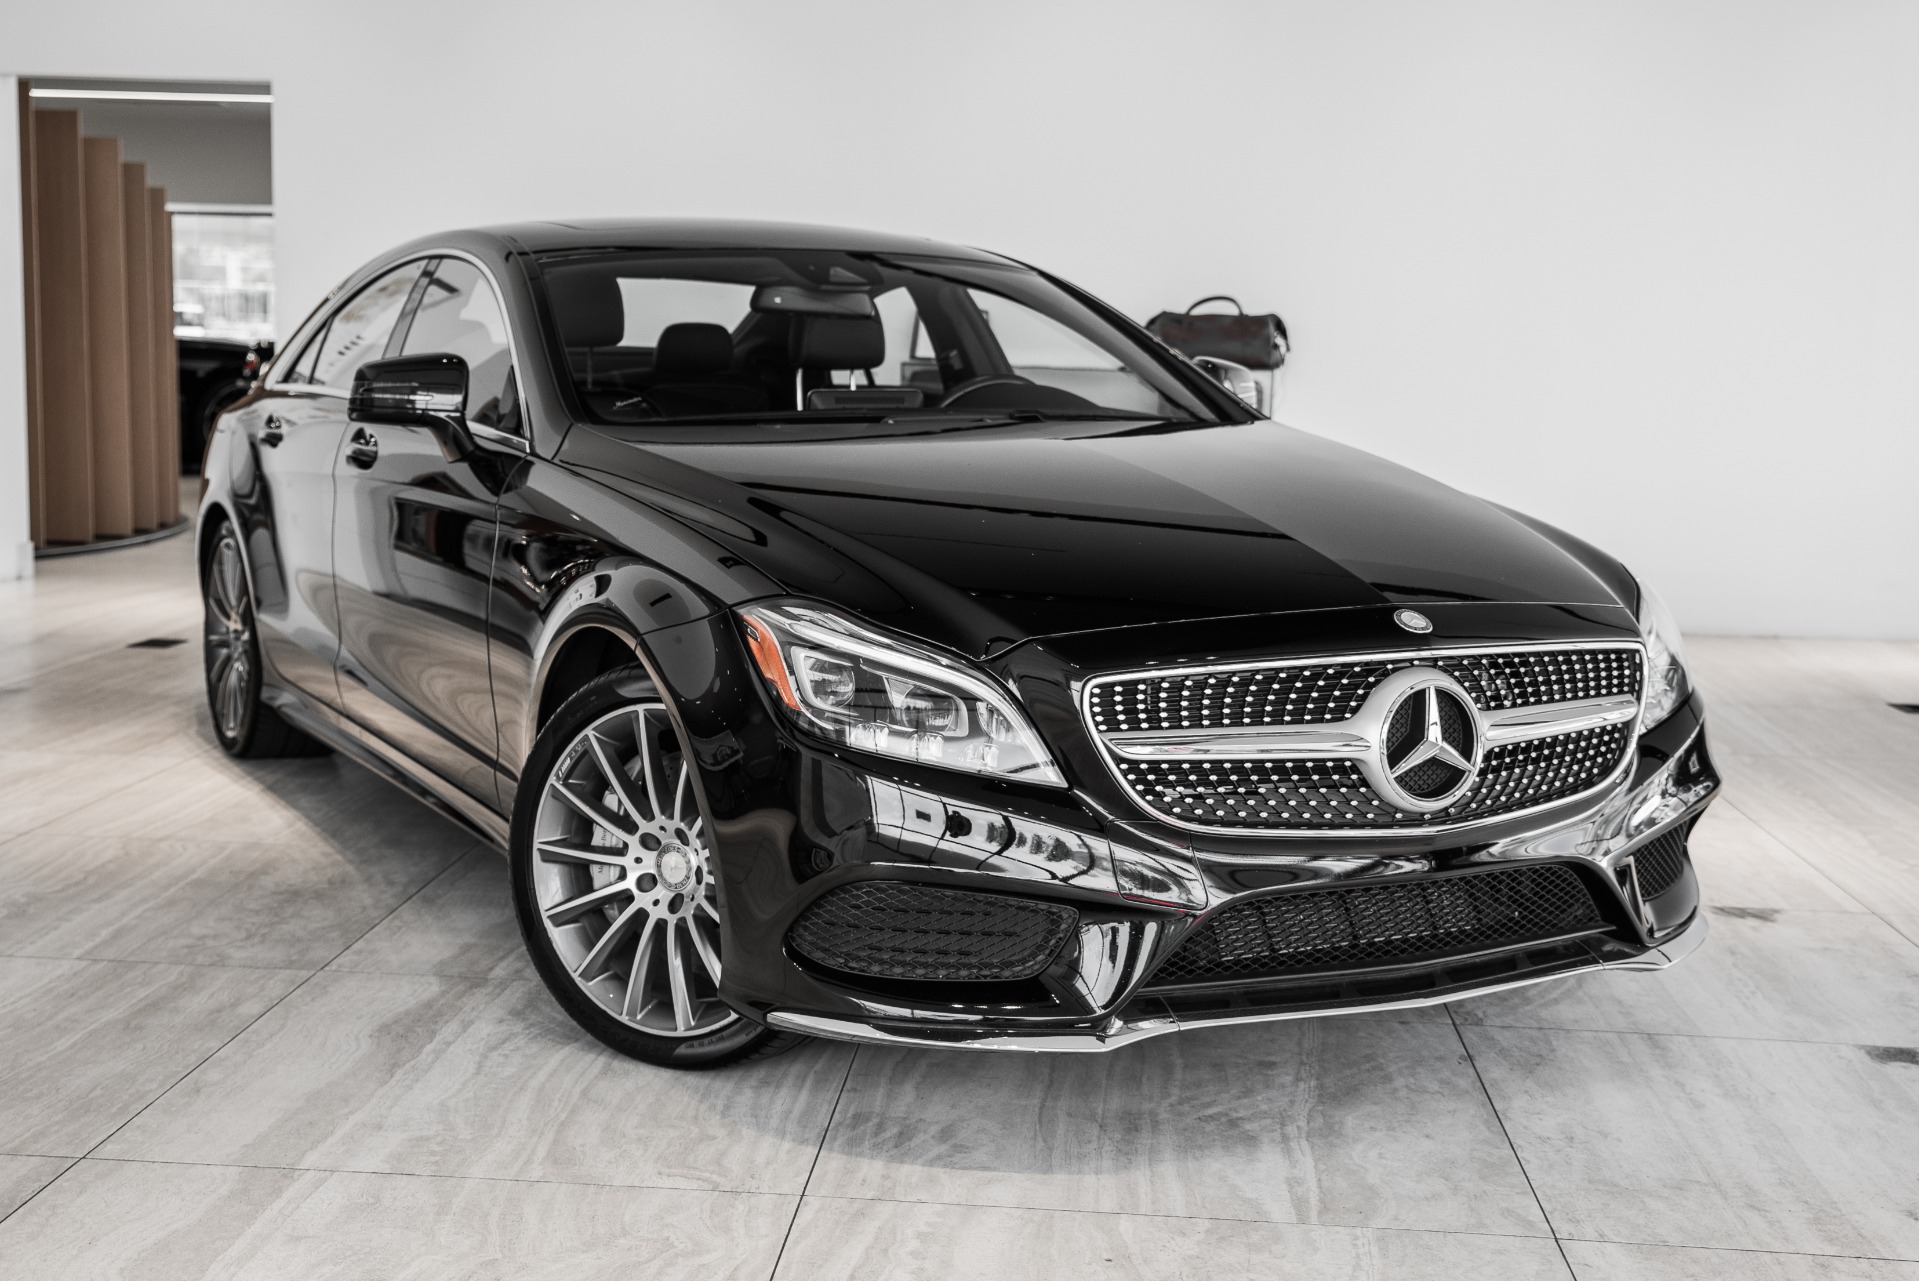 Used 2017 Mercedes Benz CLS CLS 550 4MATIC For Sale Sold Exclusive 